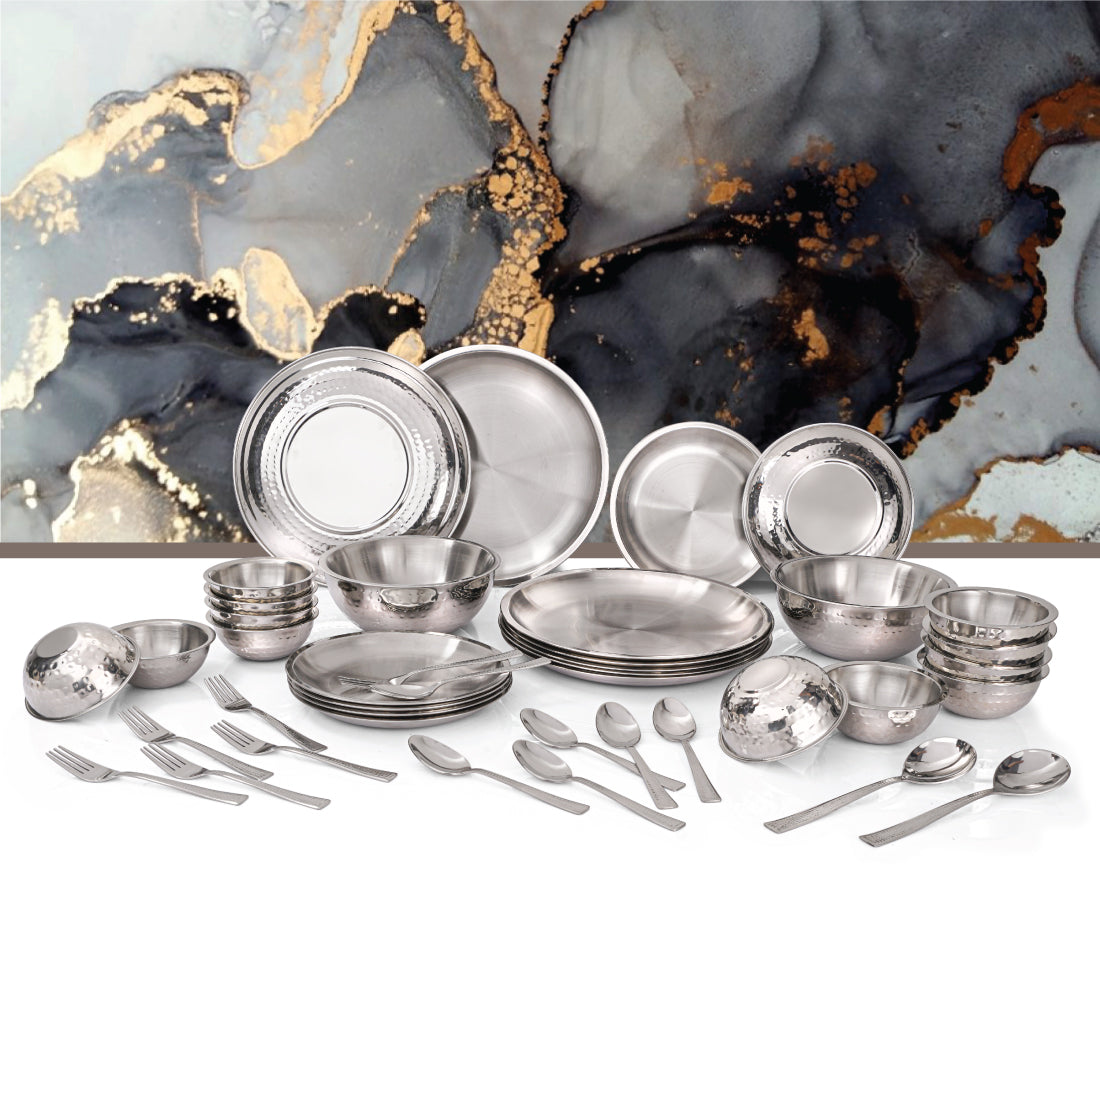 Stainless Steel 40 PCS Double Wall Hammered Dinner Set (6 People) Budget